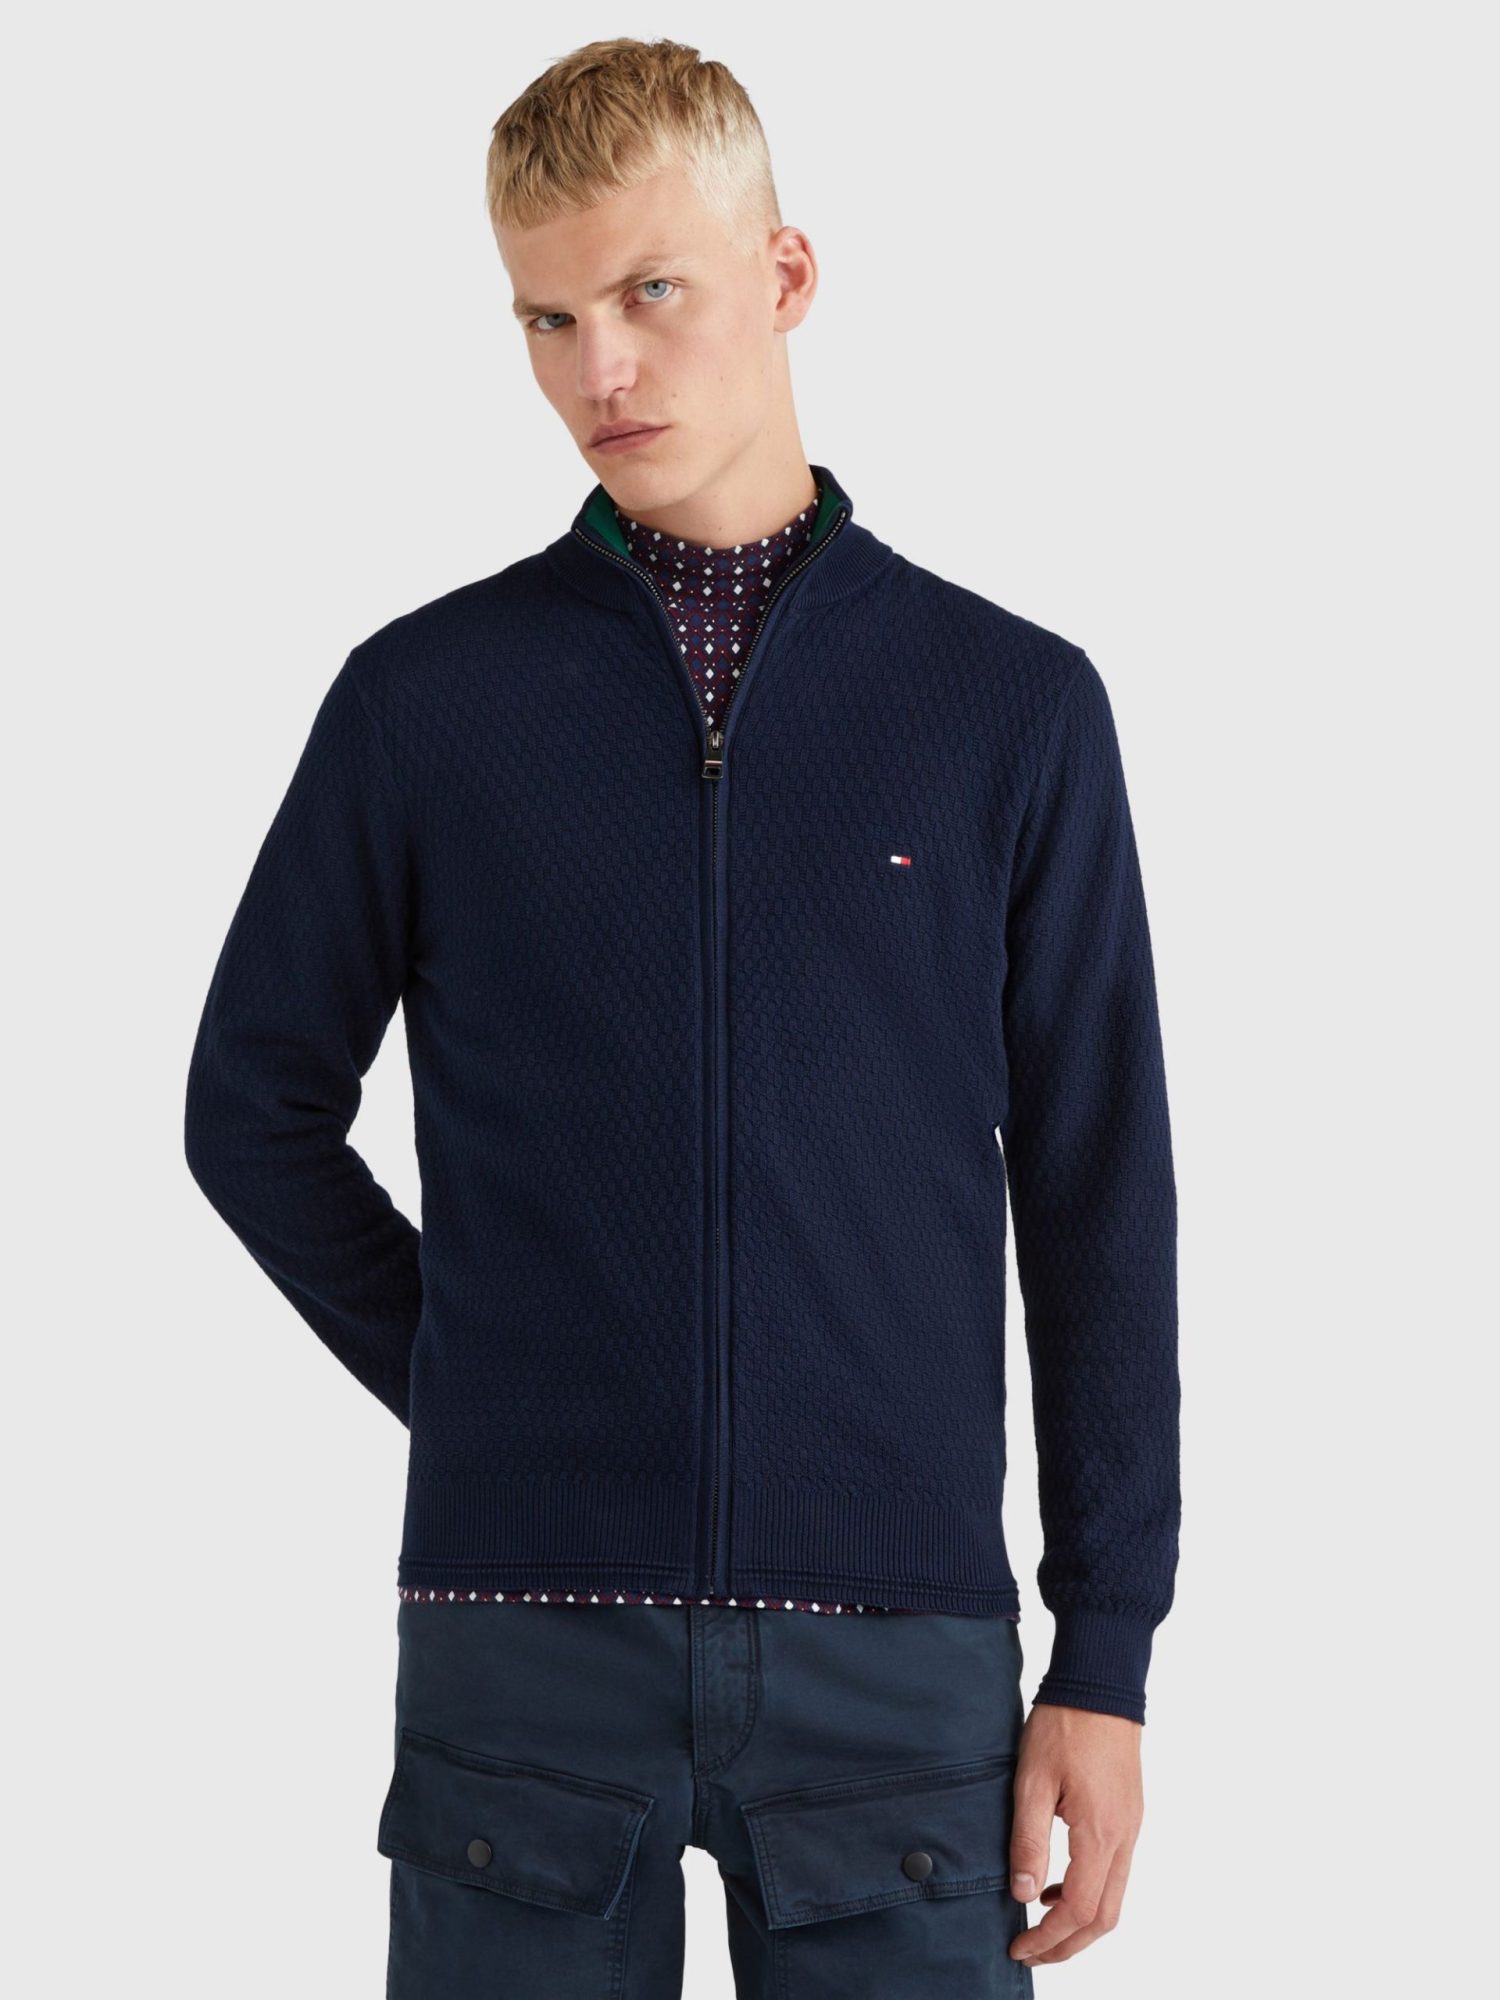 TOMMY HILFIGER CROSS STRUCTURE | Morans Menswear and Clothing, Thurles ...